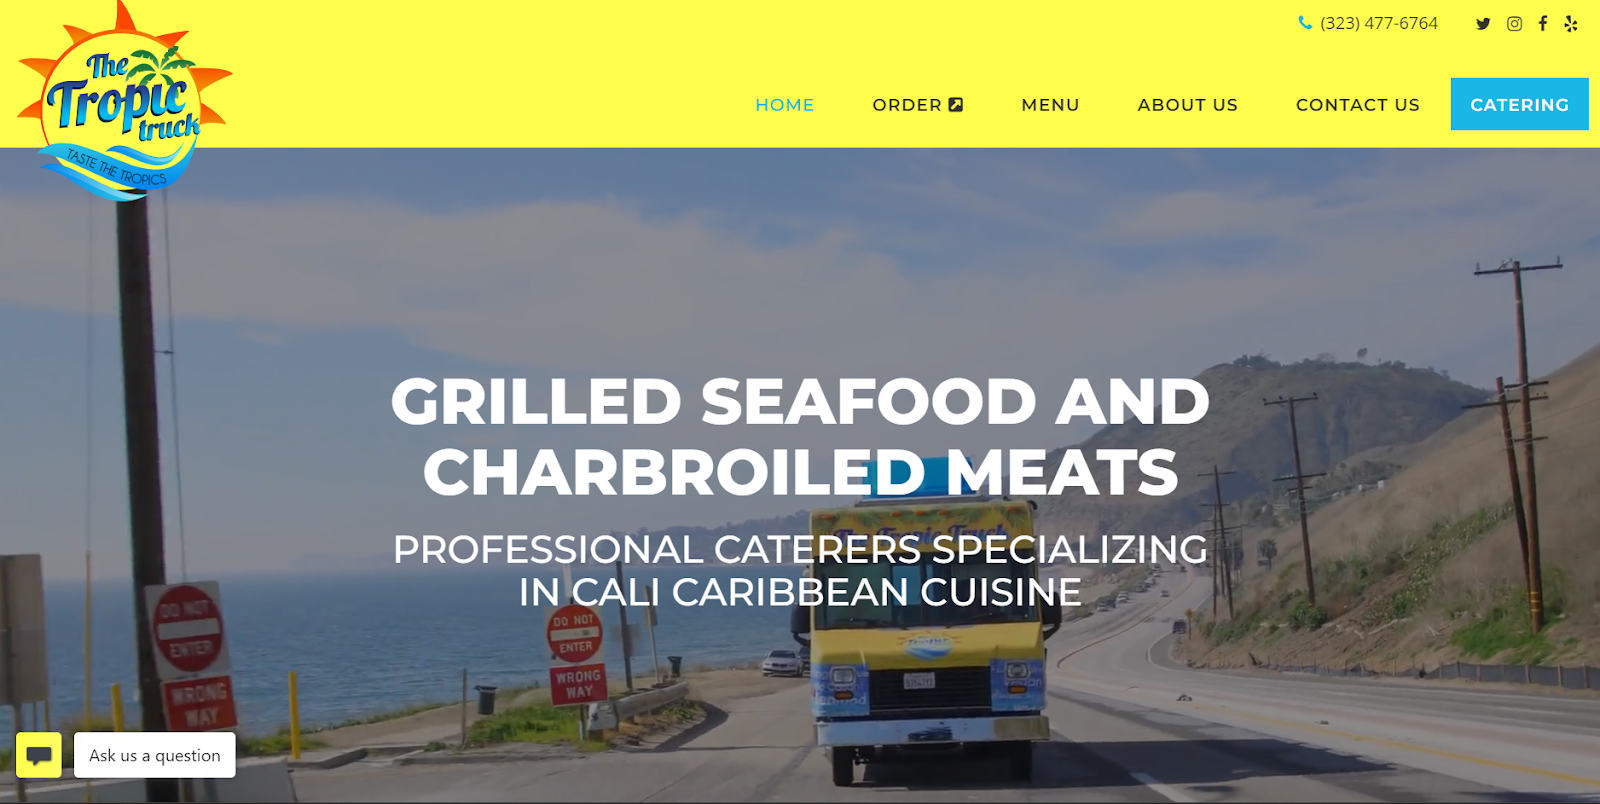 Food truck website design example from the Tropic truck.